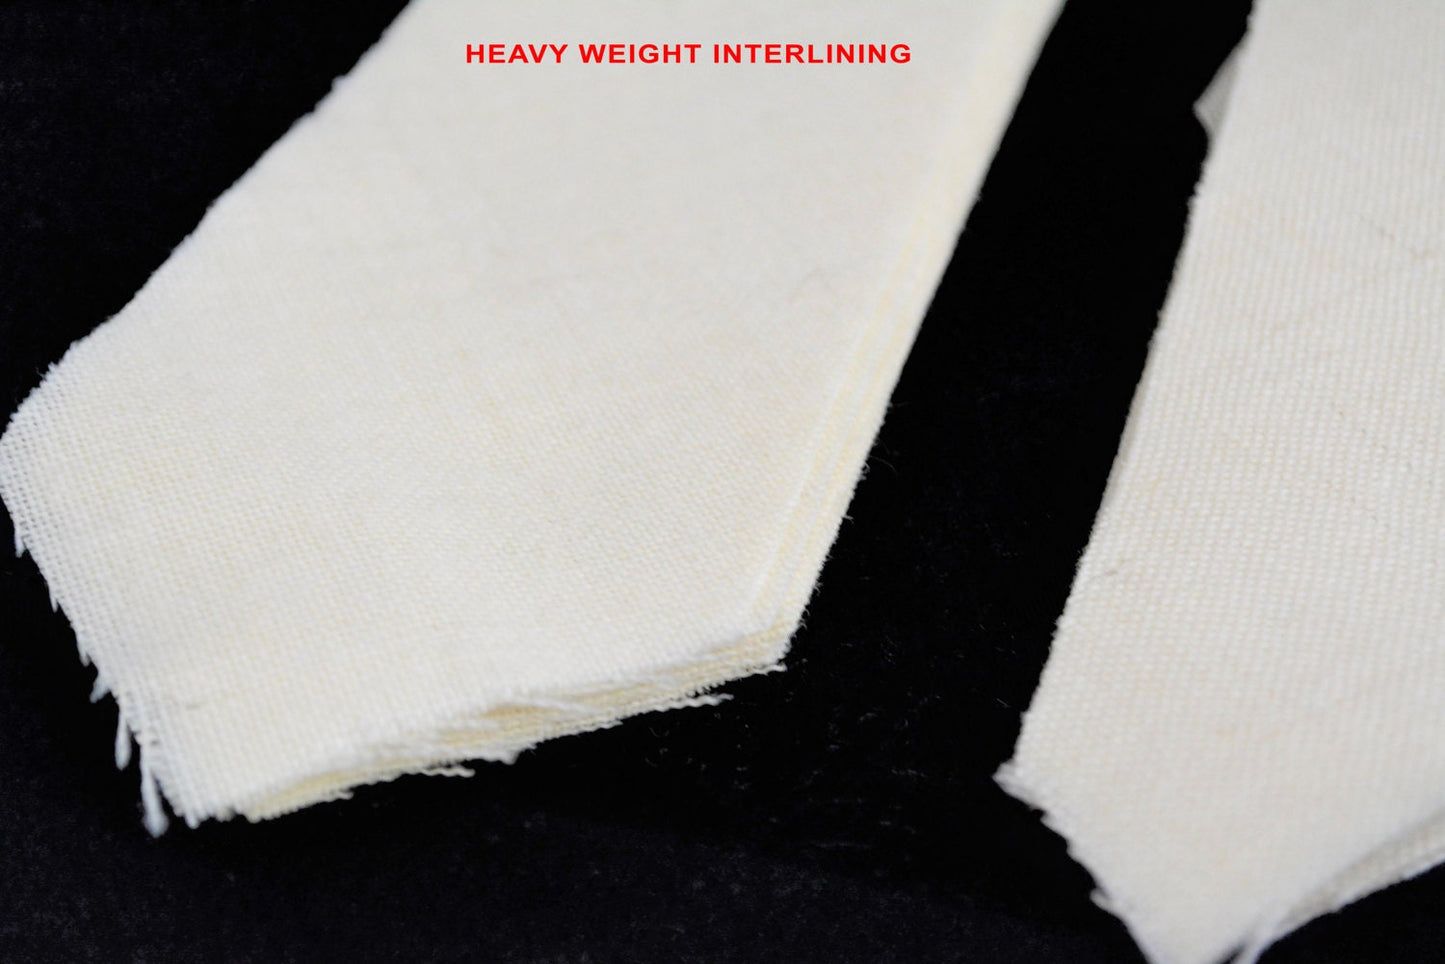 PRE-CUT 2 5/8" wide heavy weight necktie interfacing / interlining, wool + viscose AC Ter Kuile, finest available, Made Netherlands